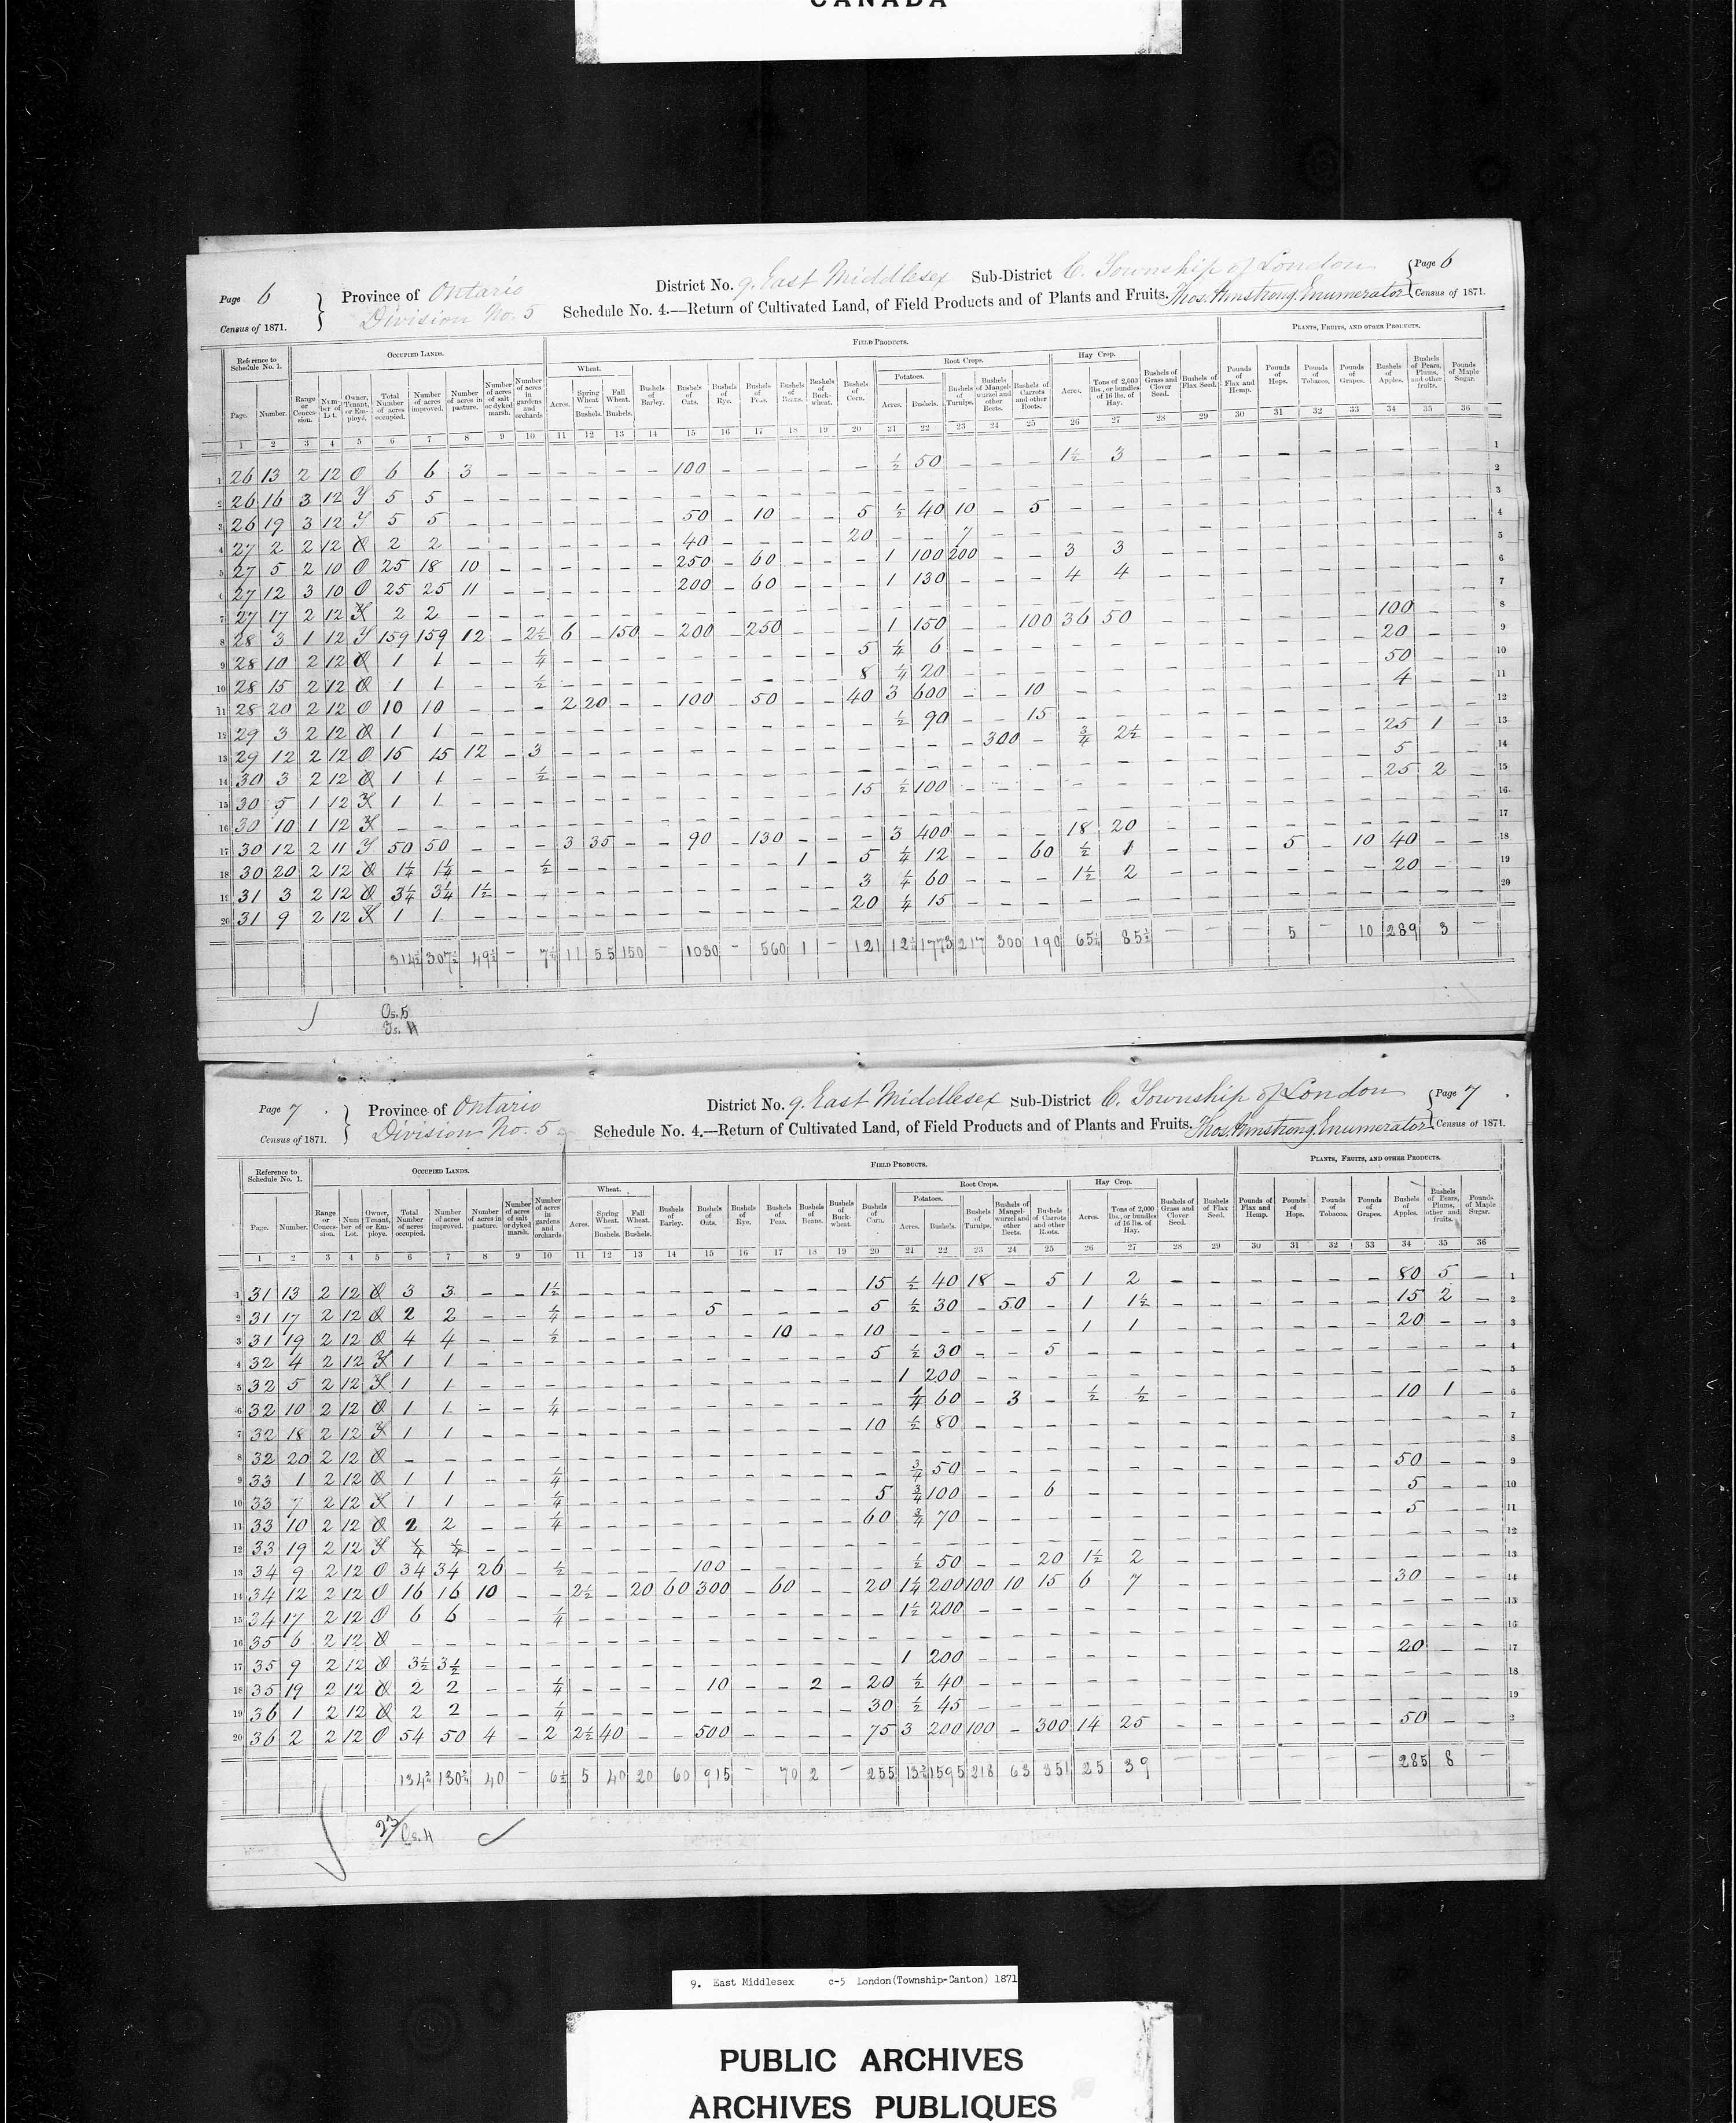 Title: Census of Canada, 1871 - Mikan Number: 142105 - Microform: c-9905